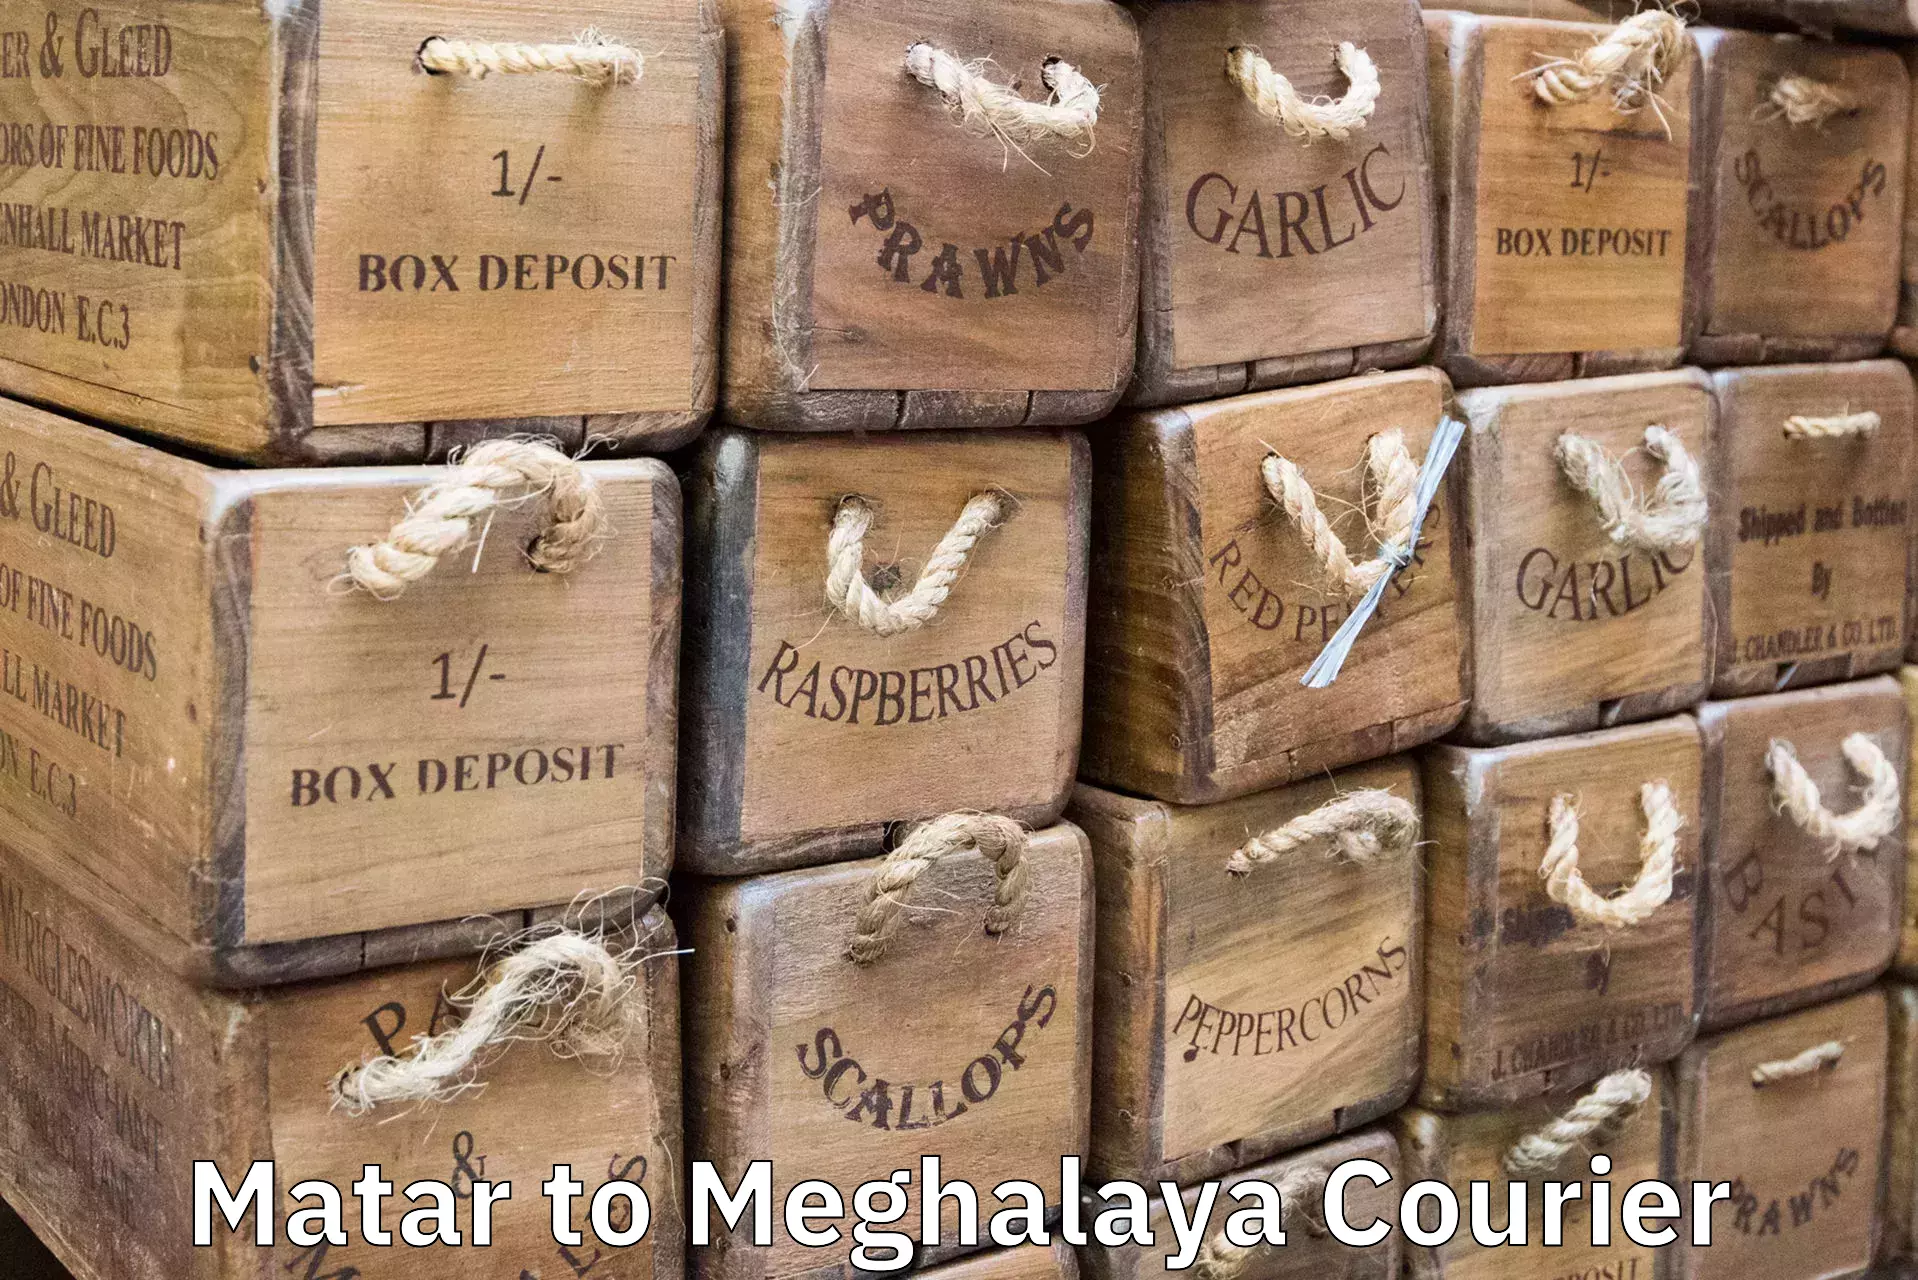 Luggage delivery providers Matar to Meghalaya